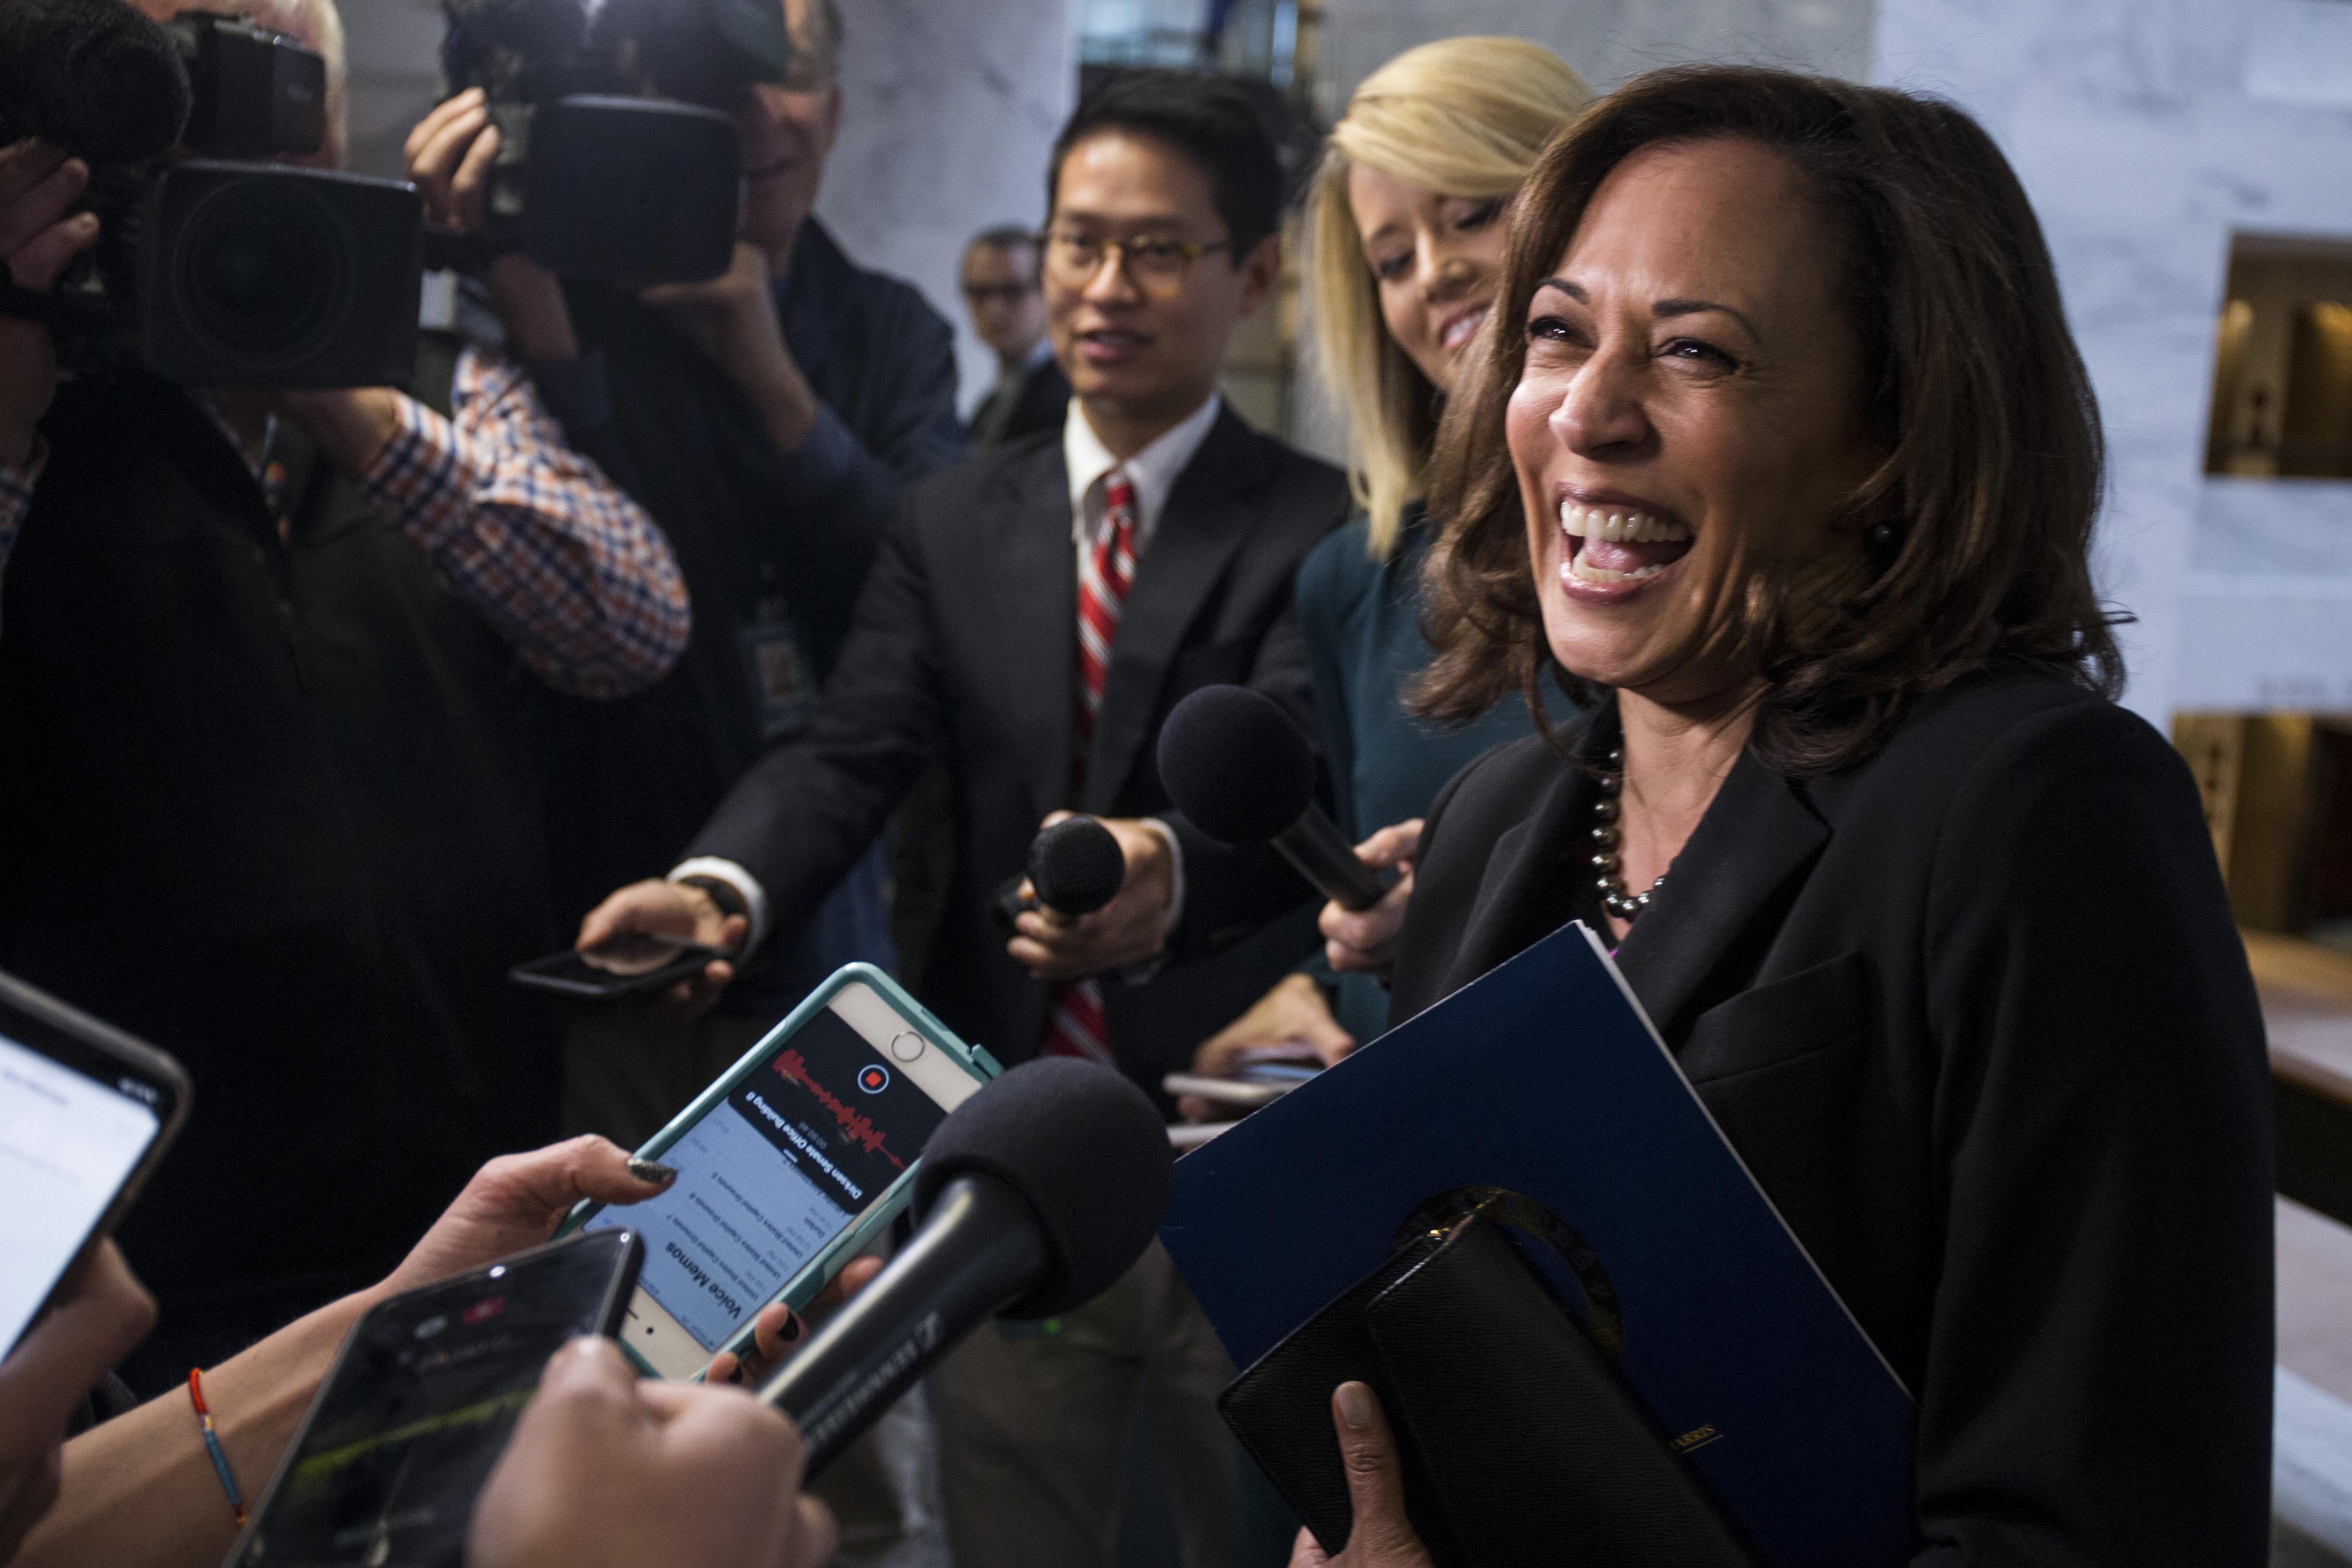 Sen. Kamala Harris (D-CA) speaks to reporters following a closed briefing on intelligence matters on Capitol Hill on December 4, 2018 in Washington, D.C.